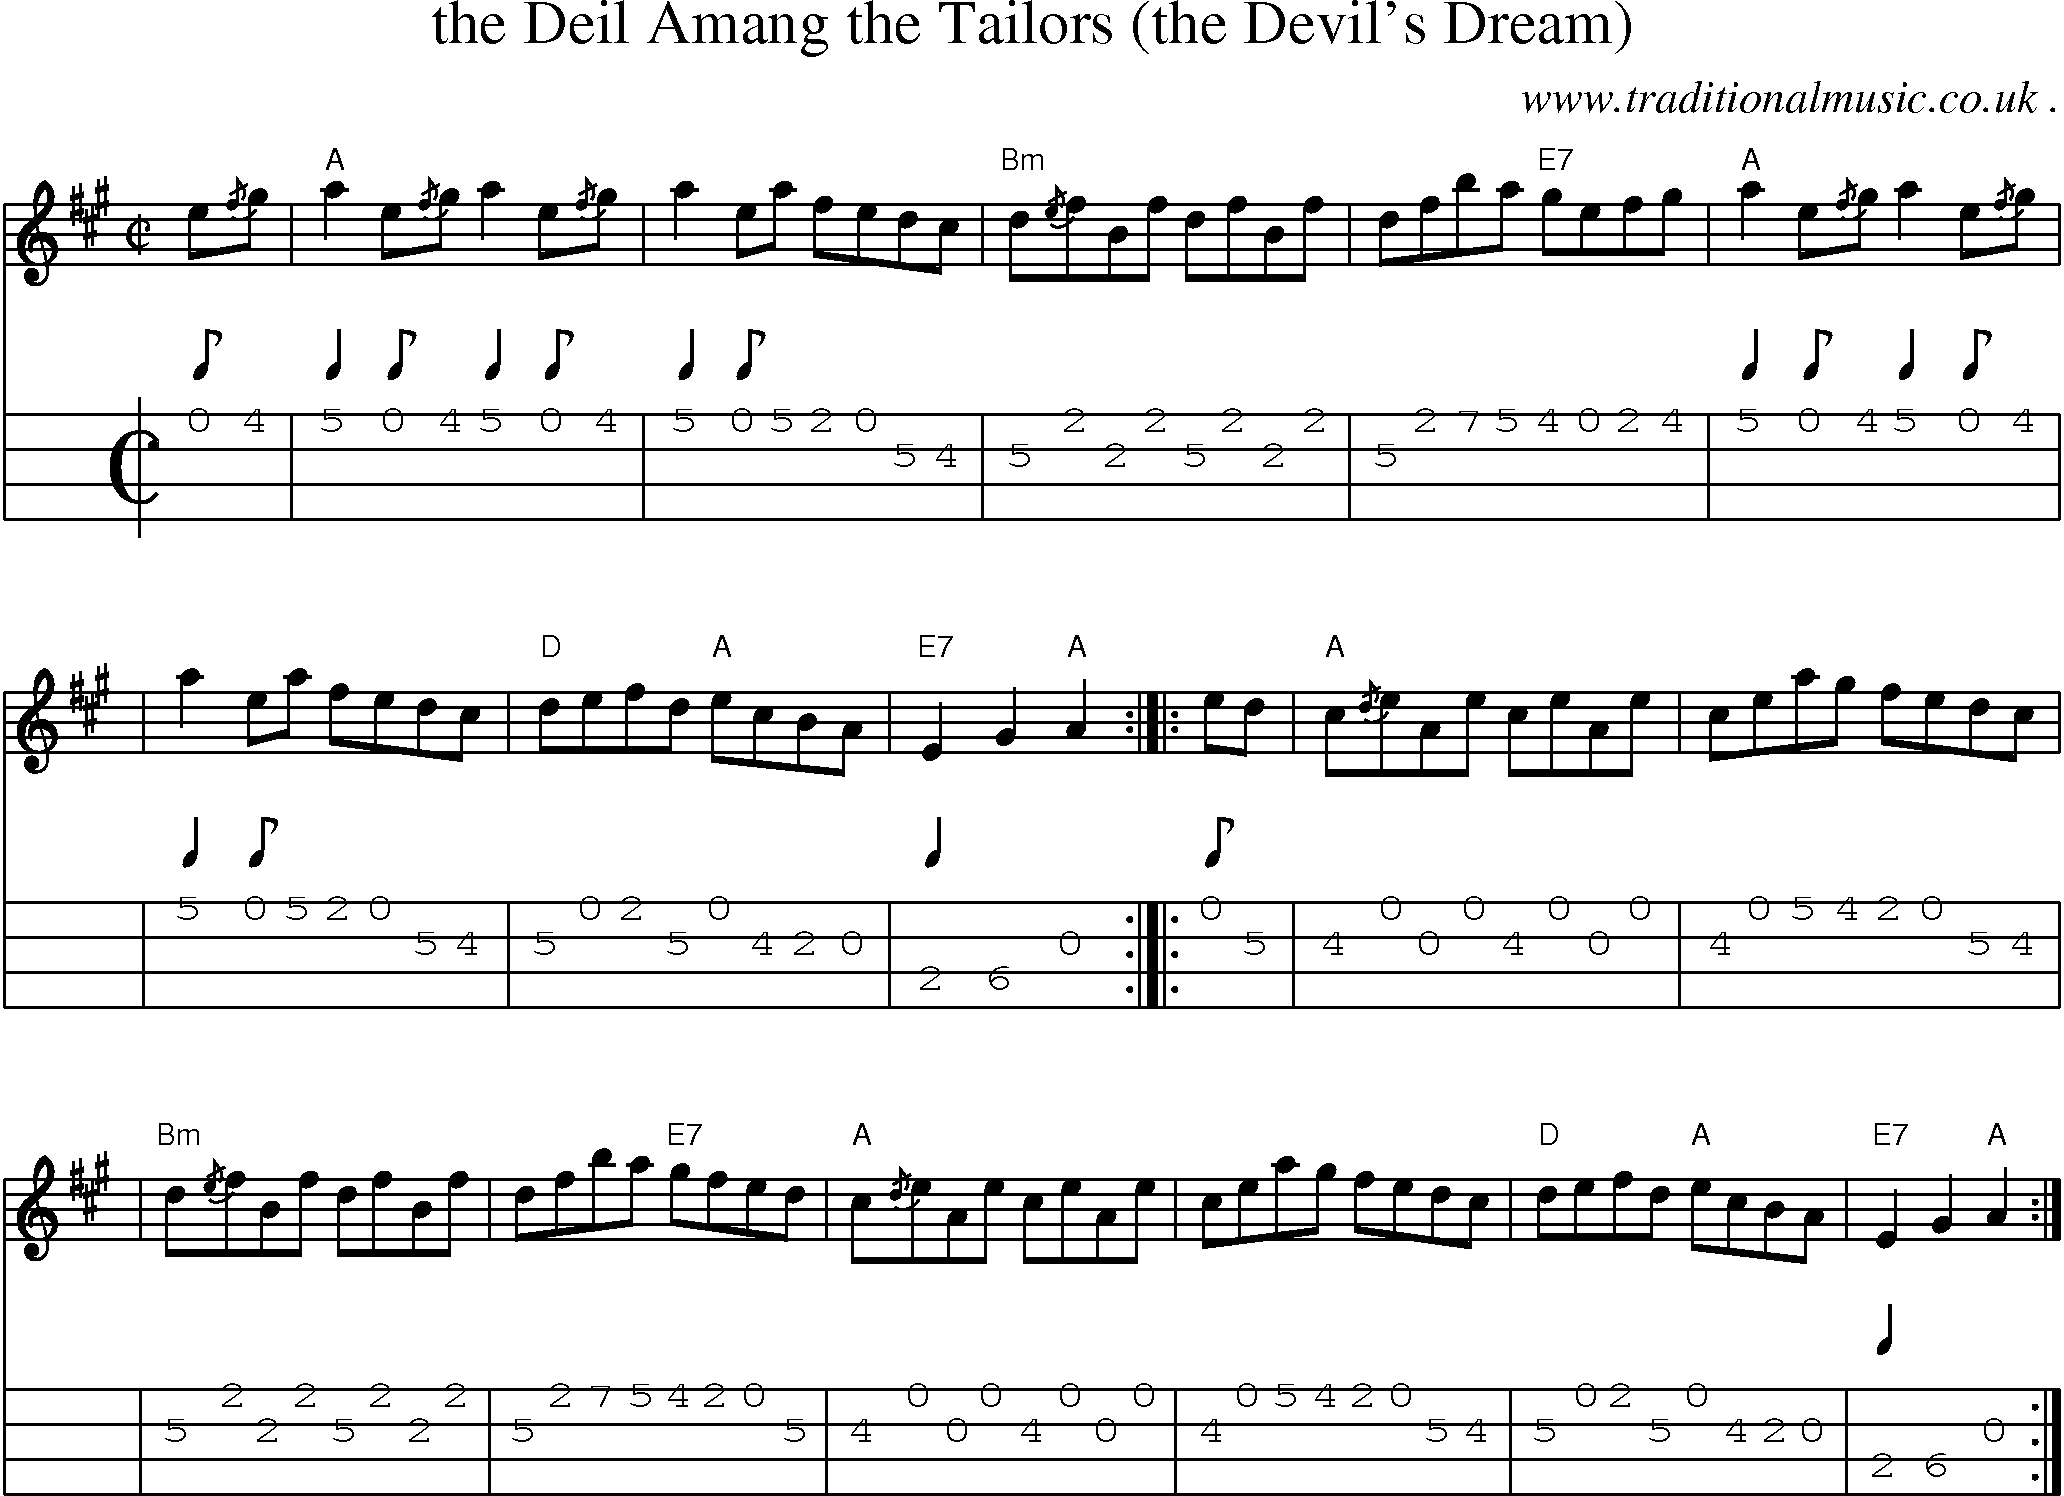 Sheet-music  score, Chords and Mandolin Tabs for The Deil Amang The Tailors The Devils Dream